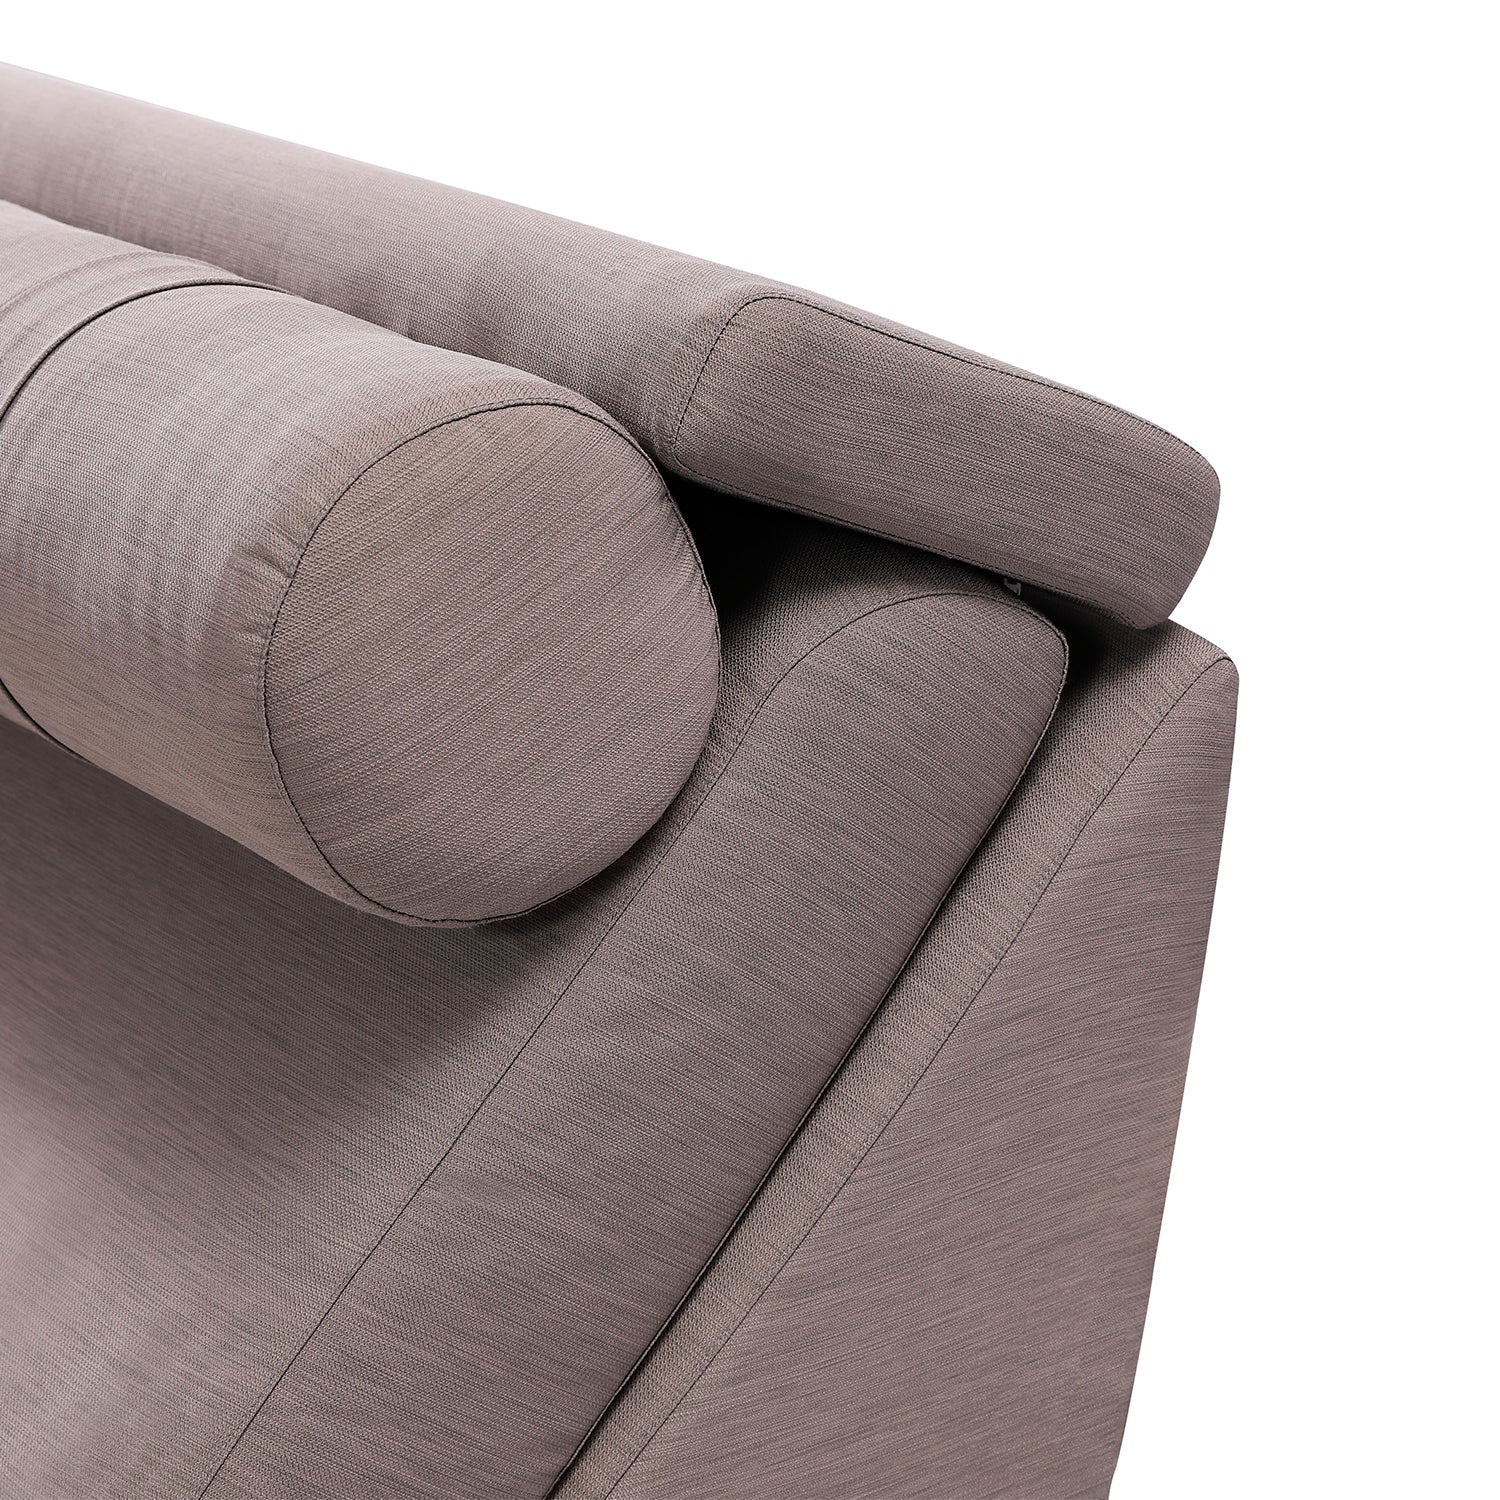 Close-up of DeRUCCI bed frame BZZ4 - 093C, featuring a cylindrical headrest in a neutral fabric.